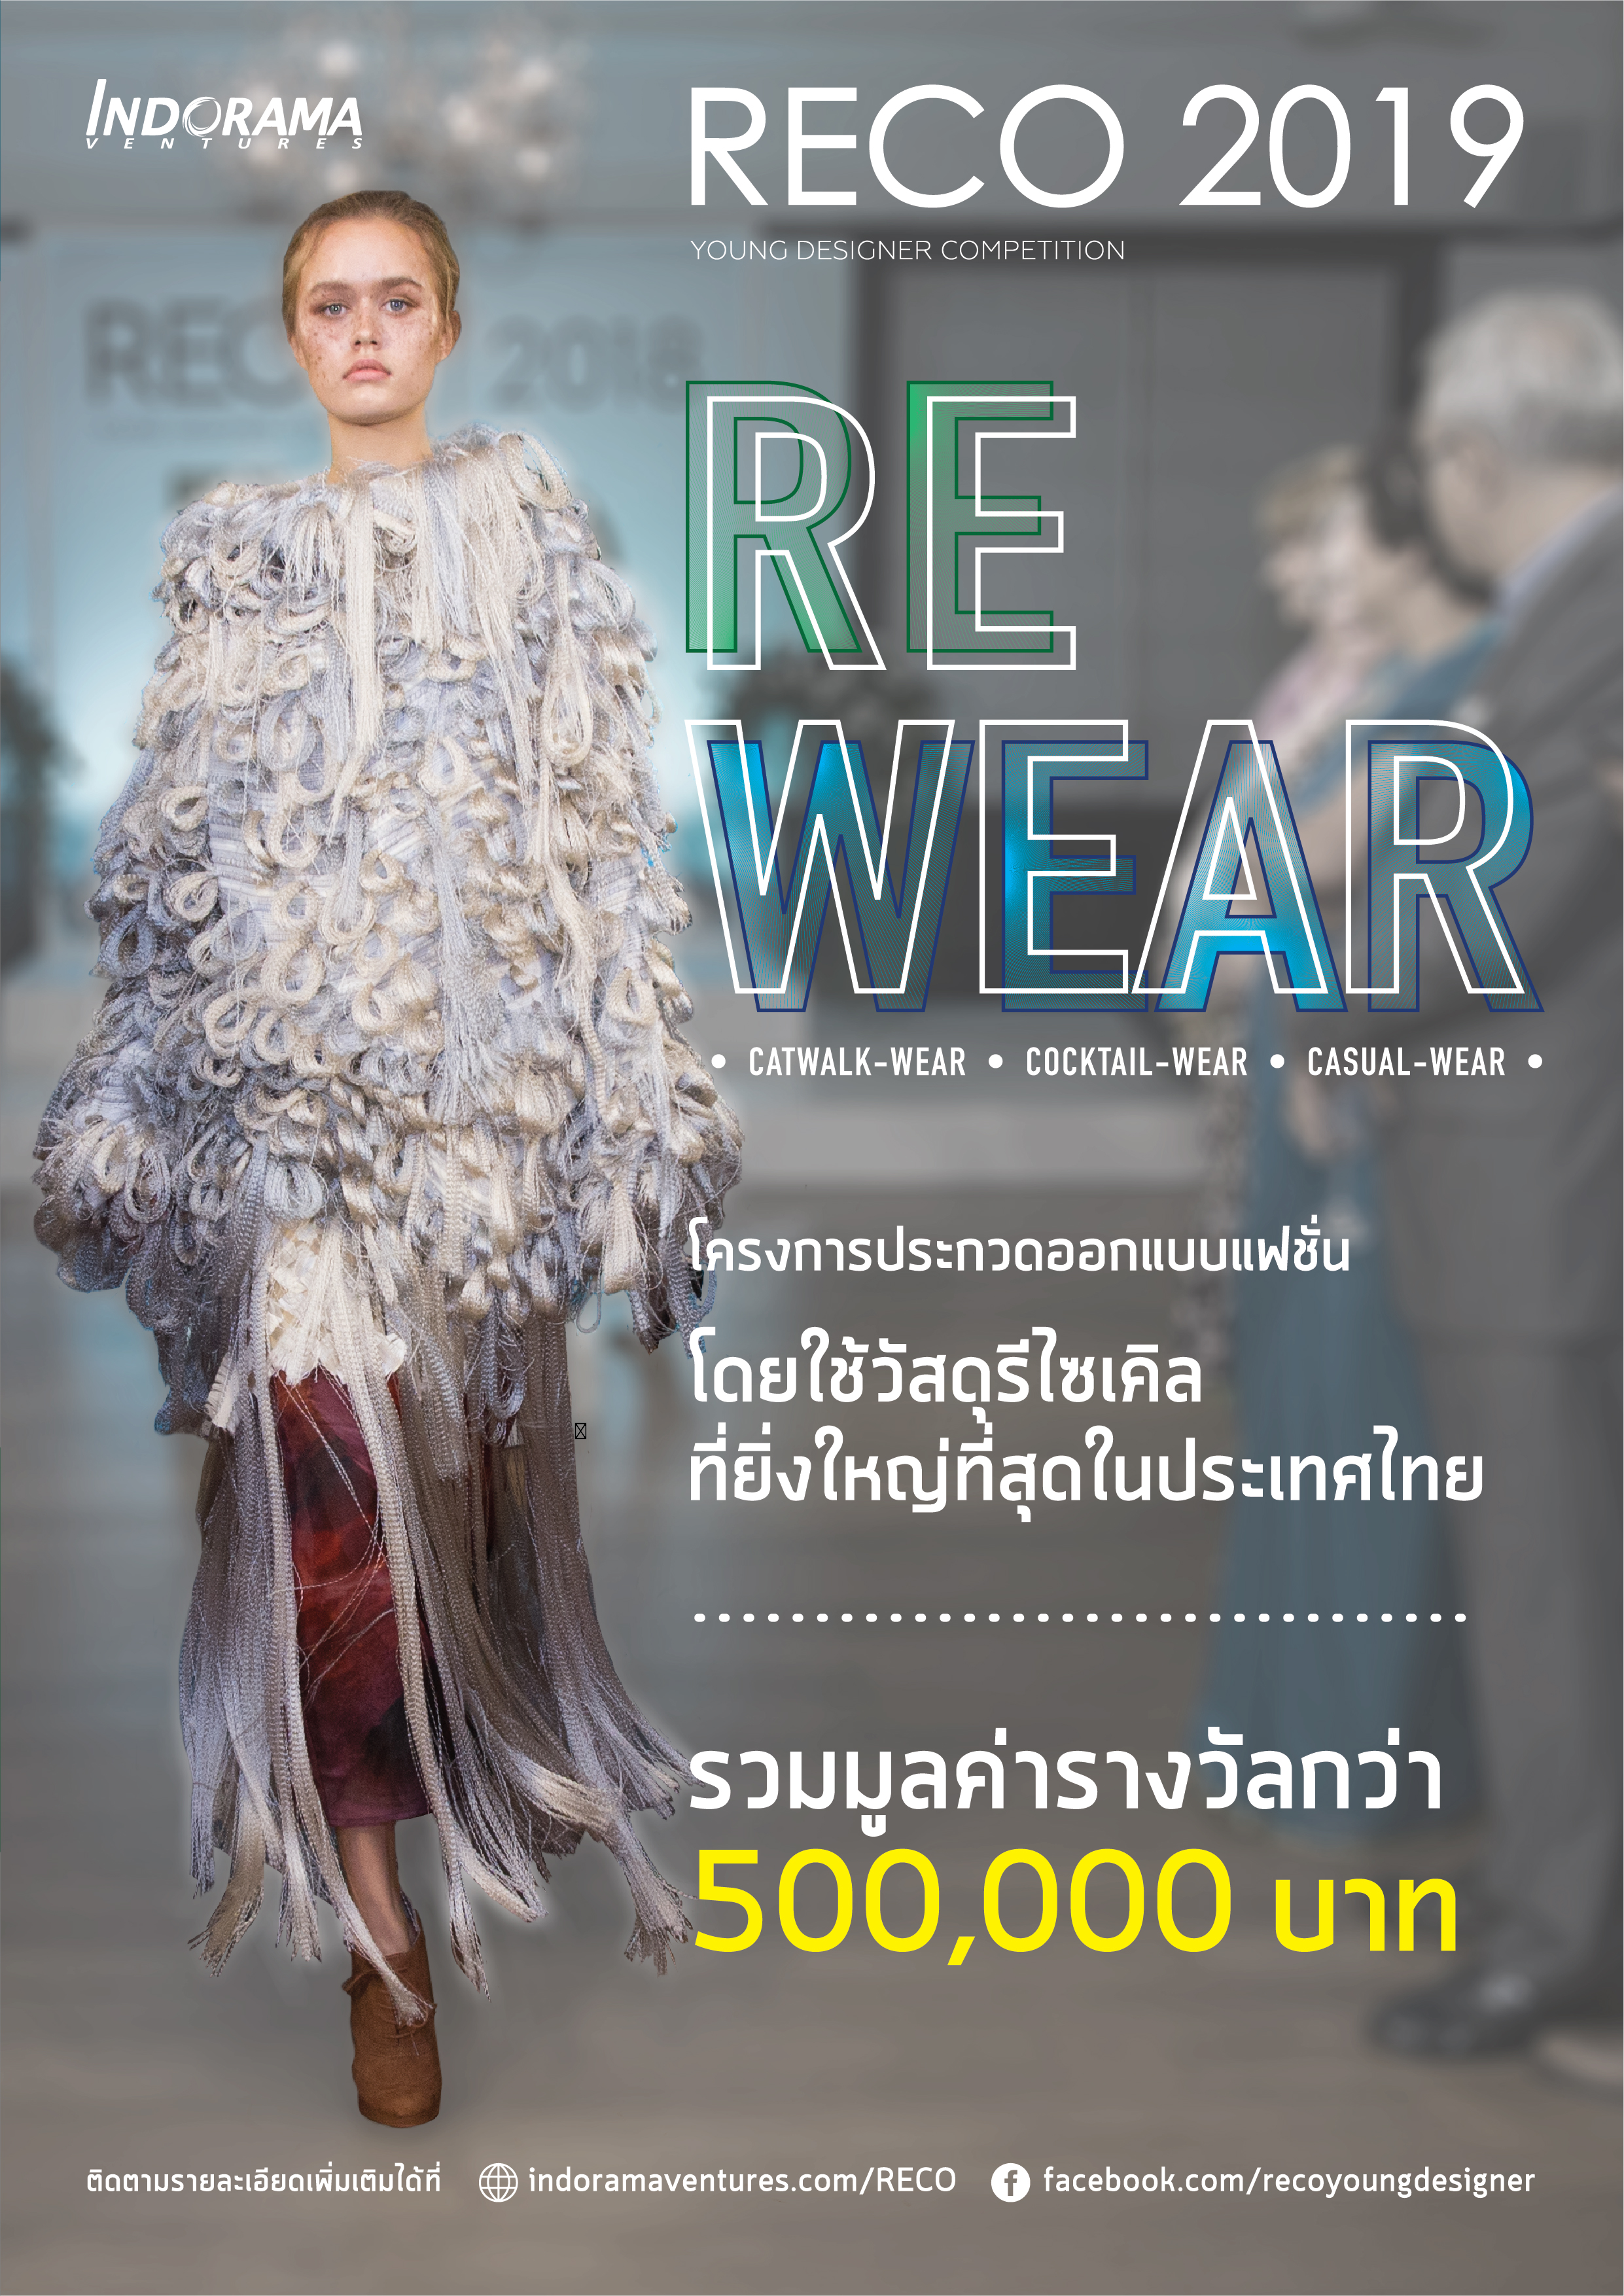 Reco Young Designer Competition 2018